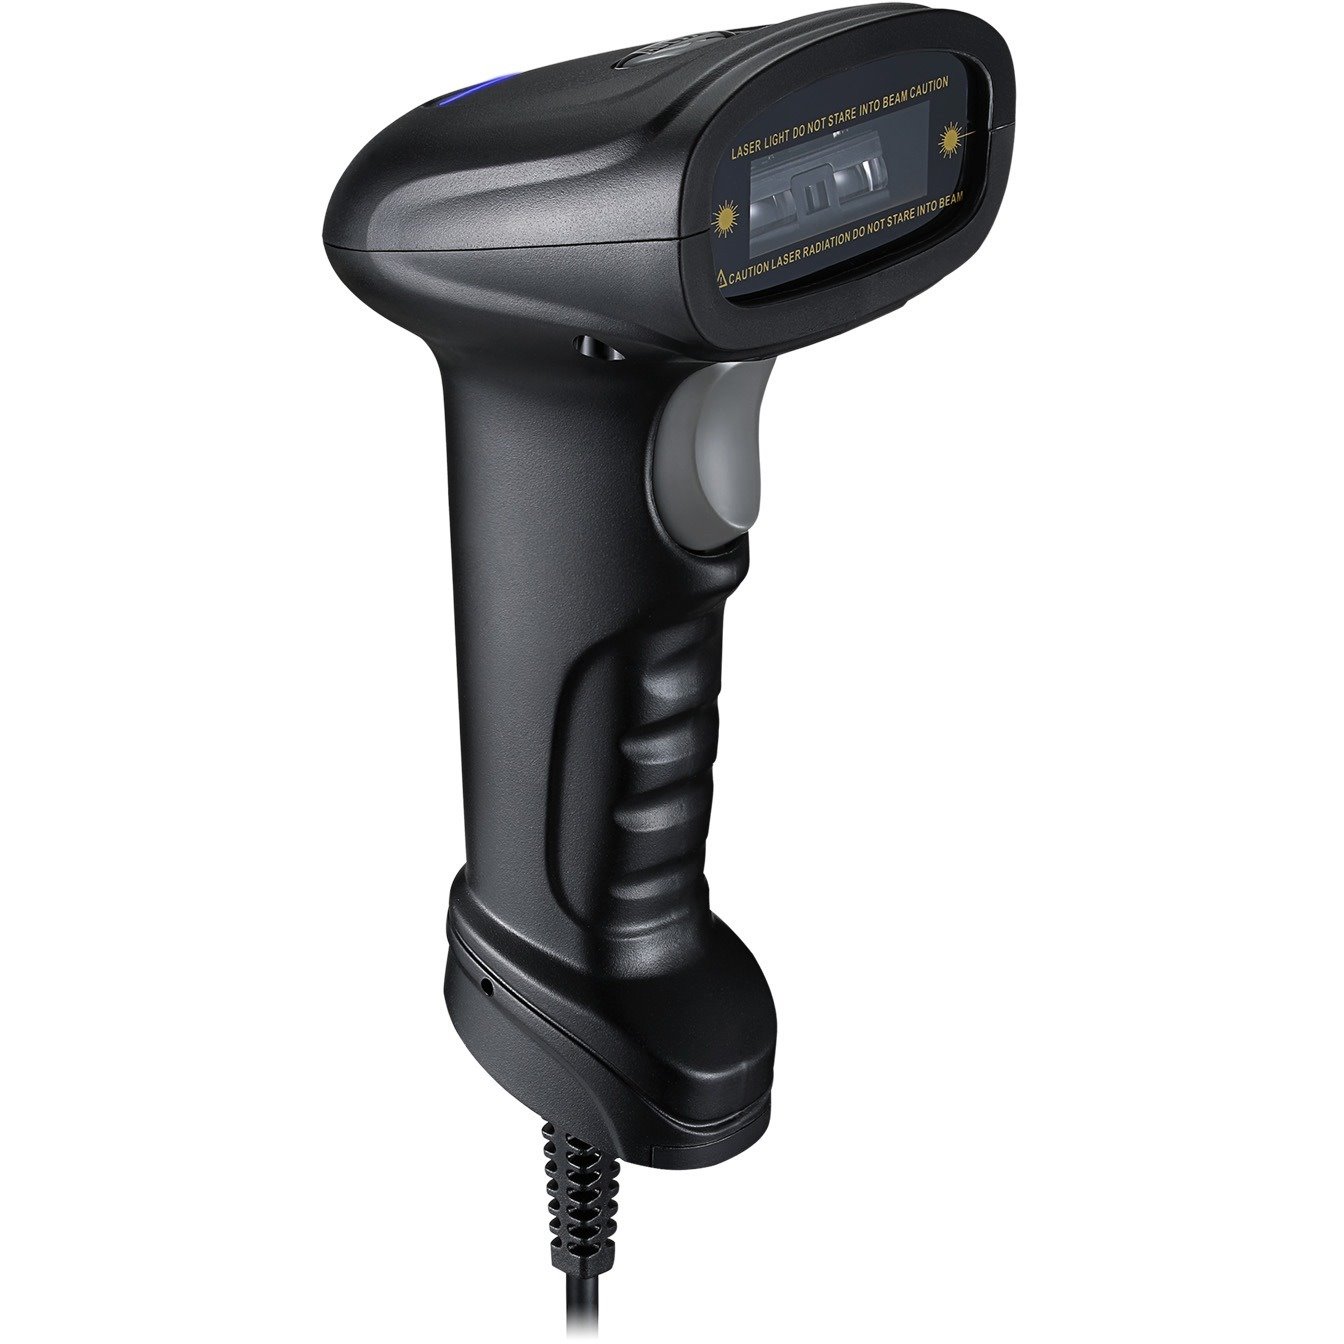 Adesso NuScan 1600U Healthcare, Warehouse Handheld Barcode Scanner - Cable Connectivity